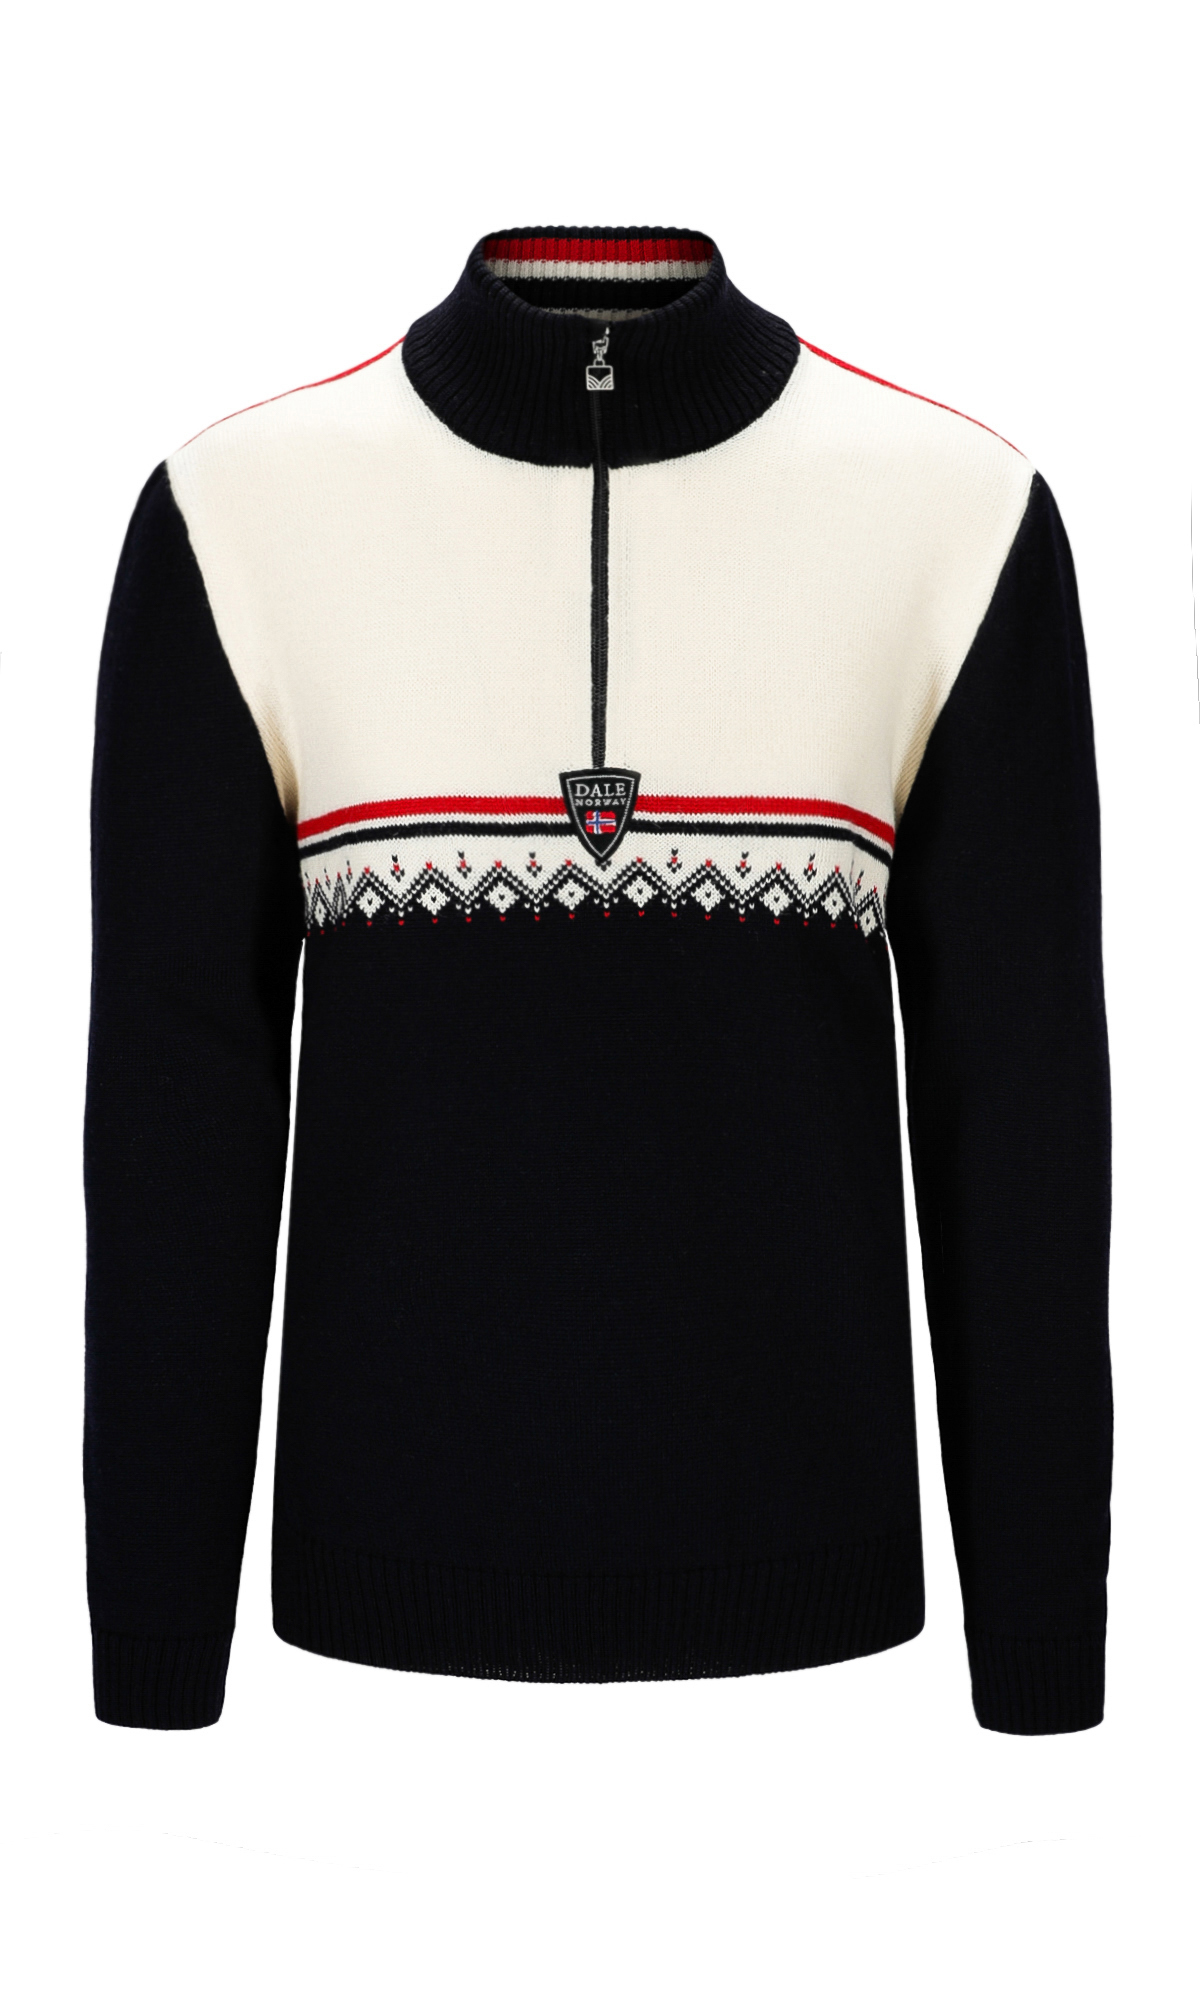 Lahti Sweater - Men - Navy/Offwhite - Dale of Norway - Dale of Norway